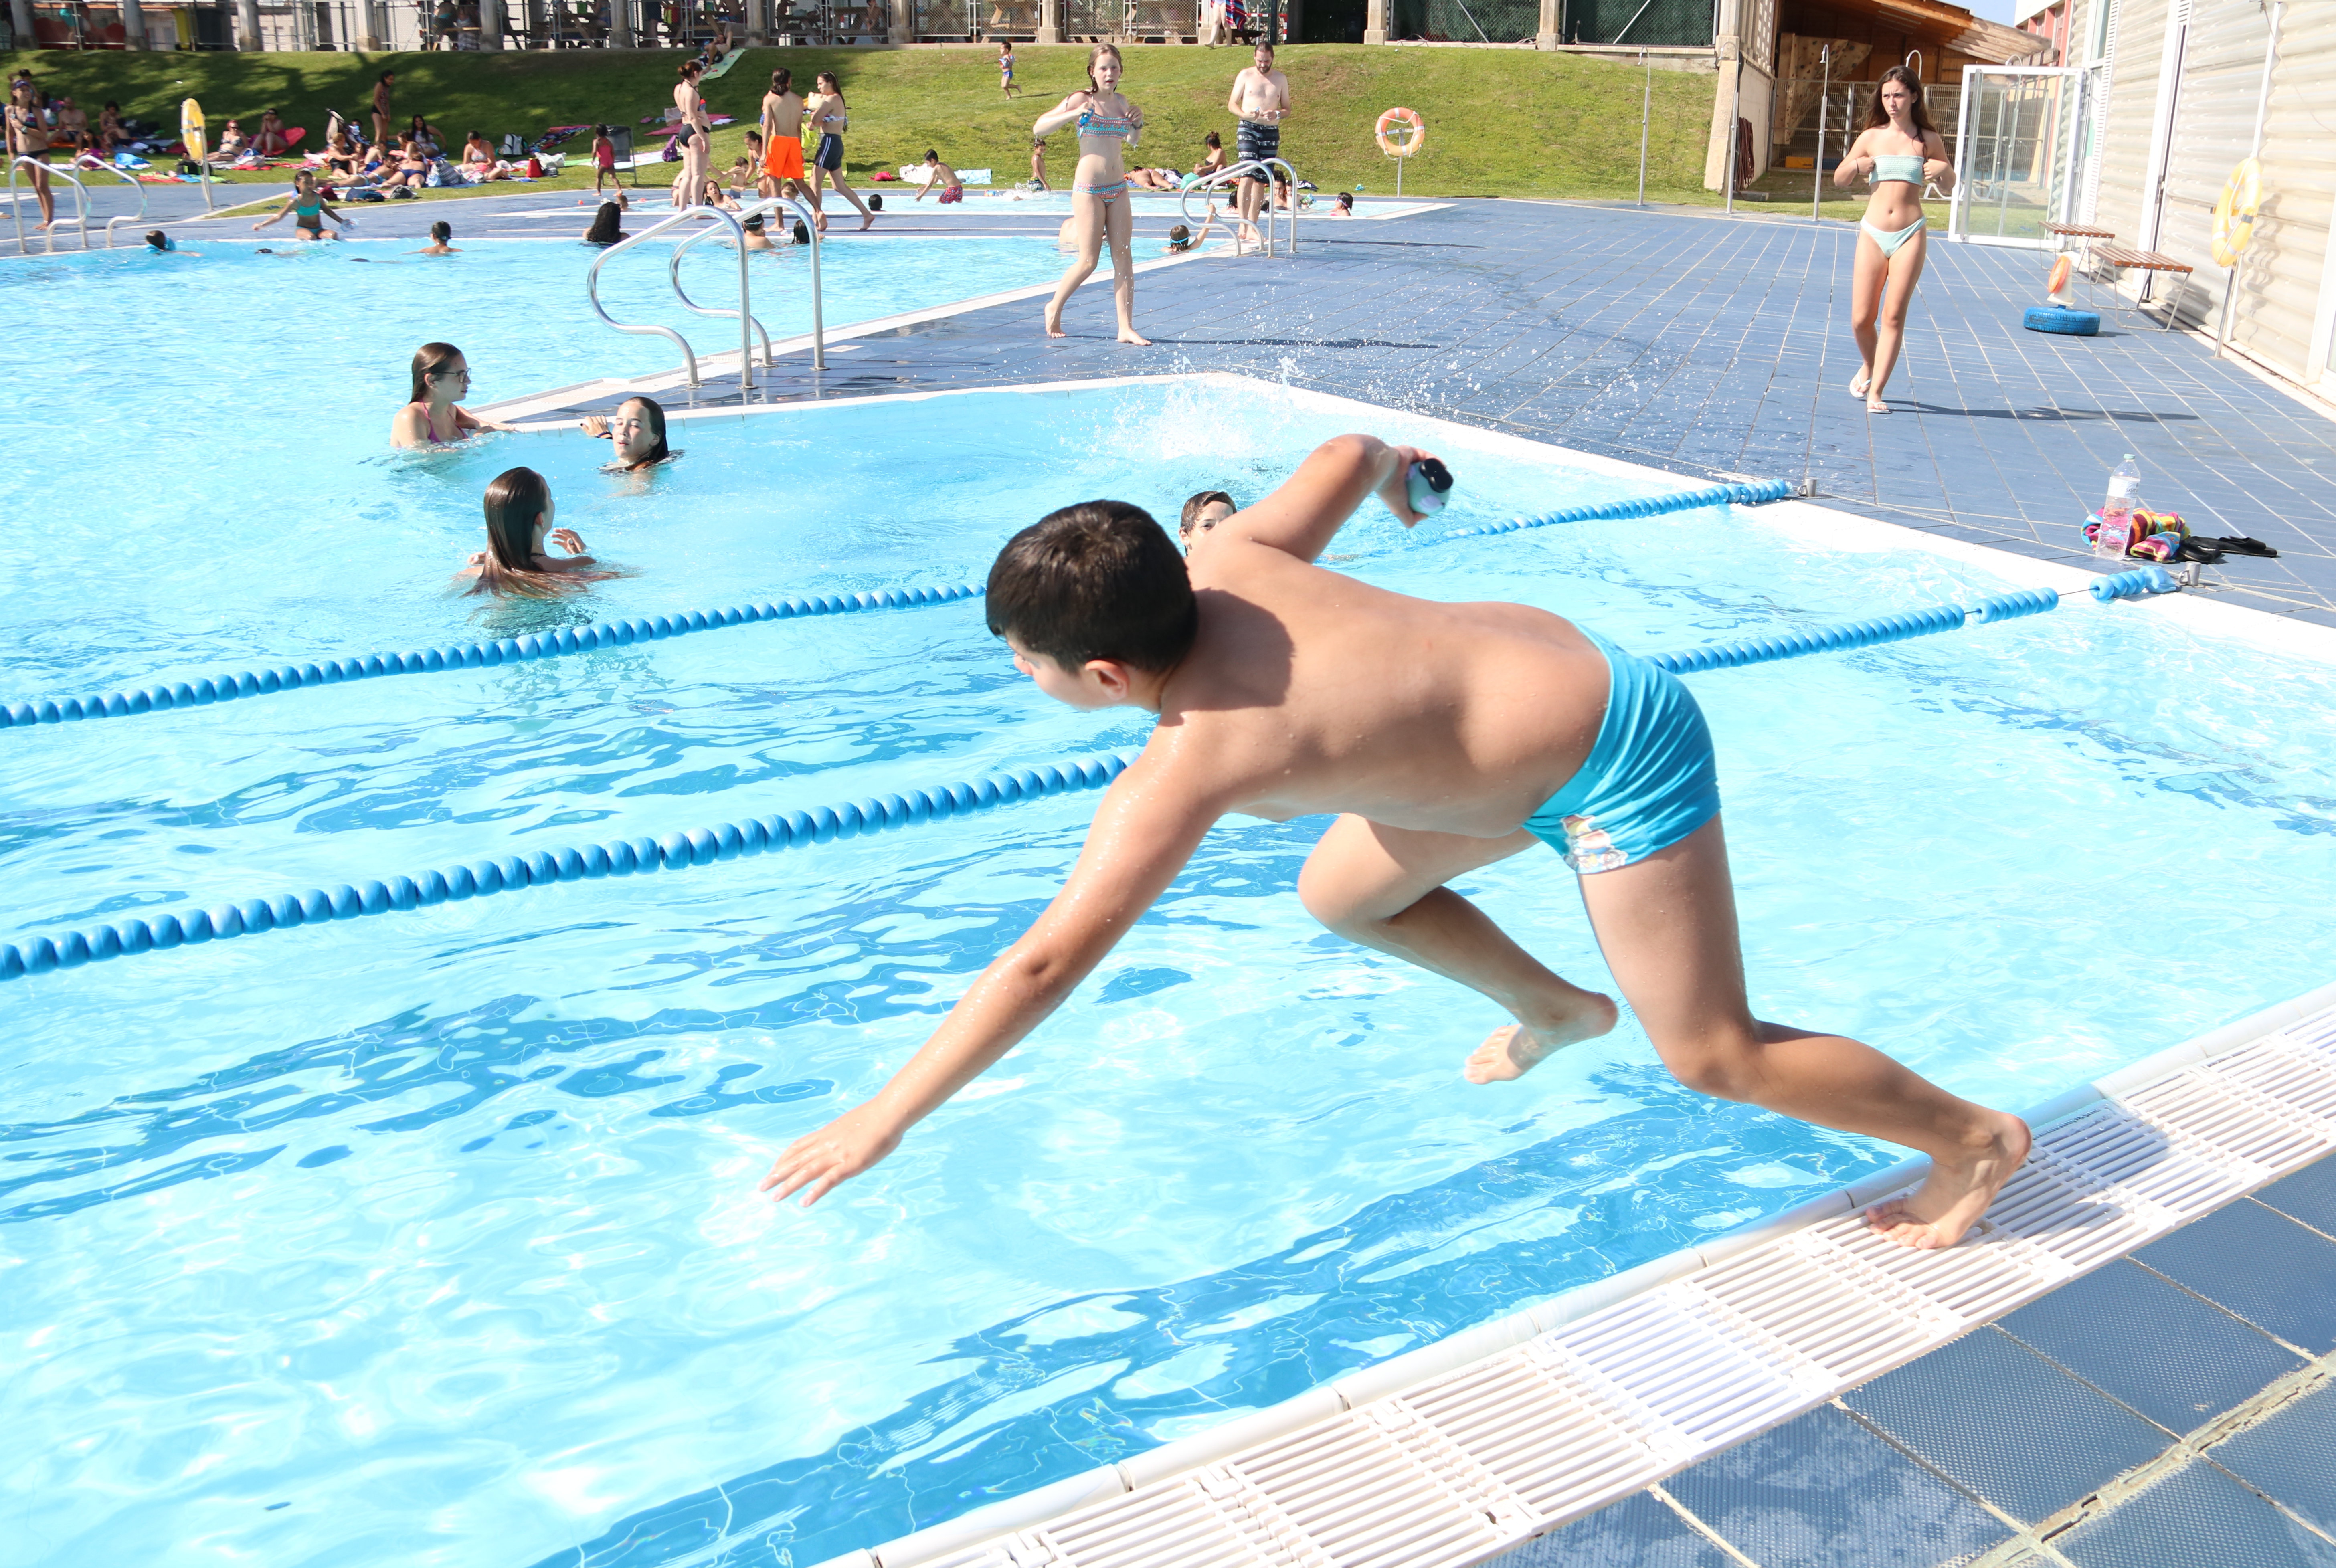 A child jumping into a swimming pool in Figueres (Gemma Tubert/ACN)